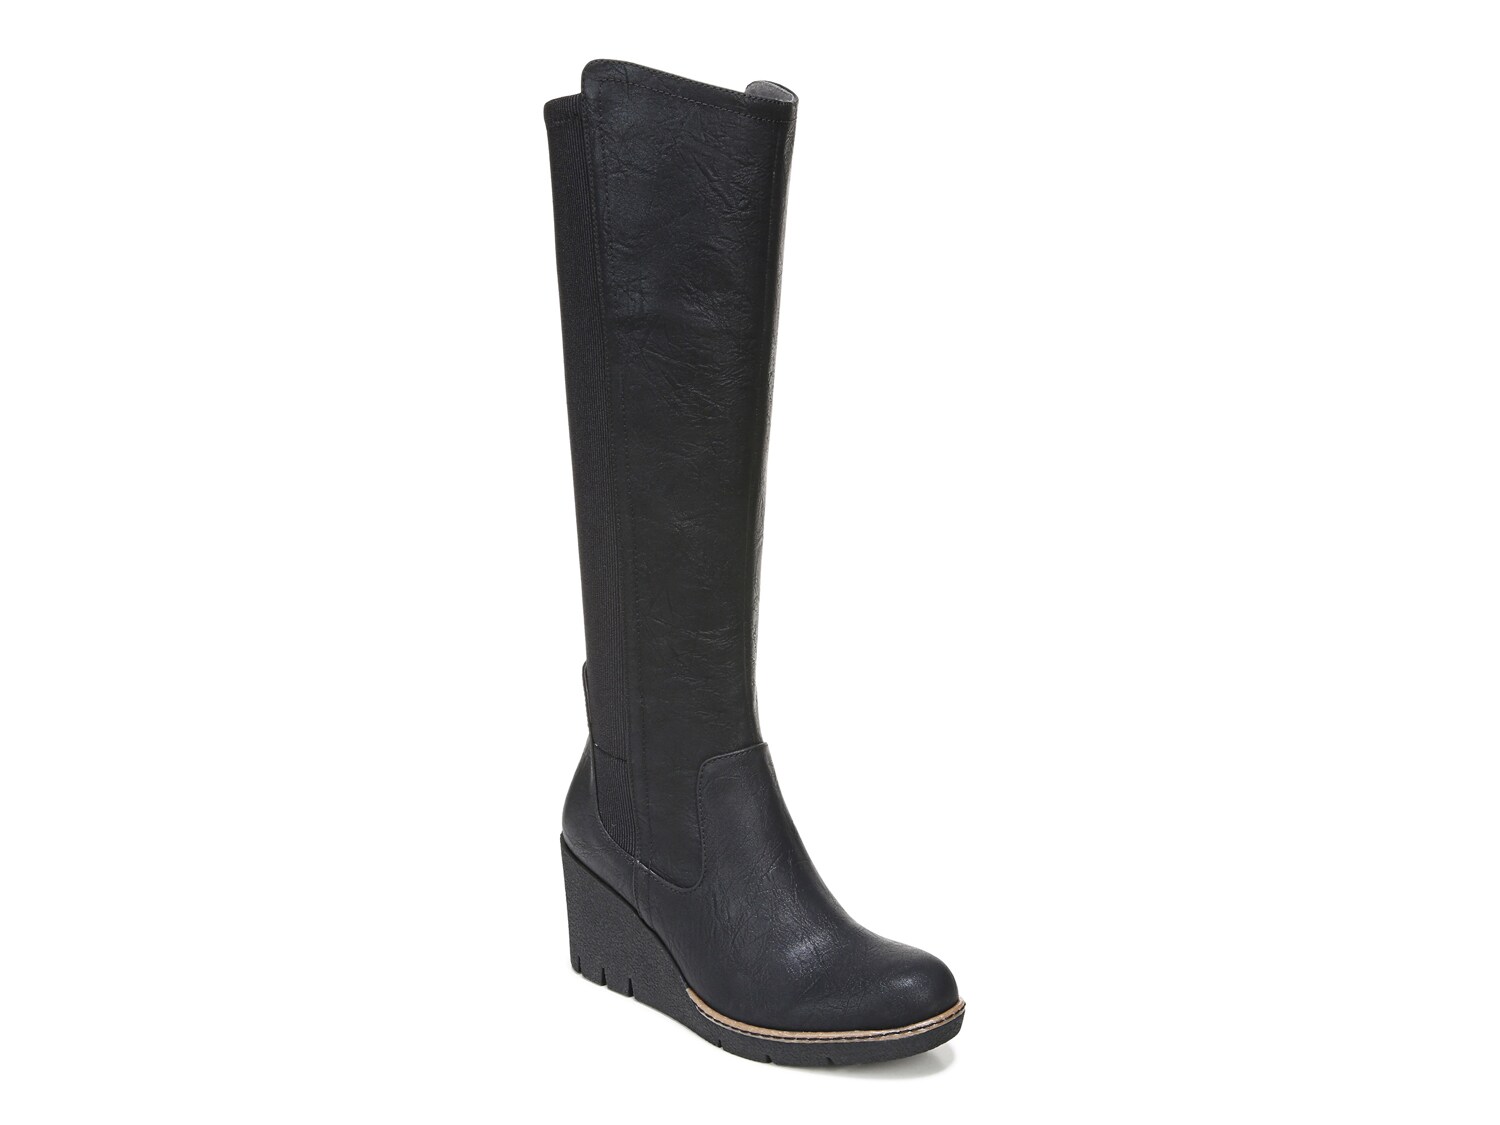 Dr. Scholl's Lindy Wedge Boot - Free Shipping | DSW